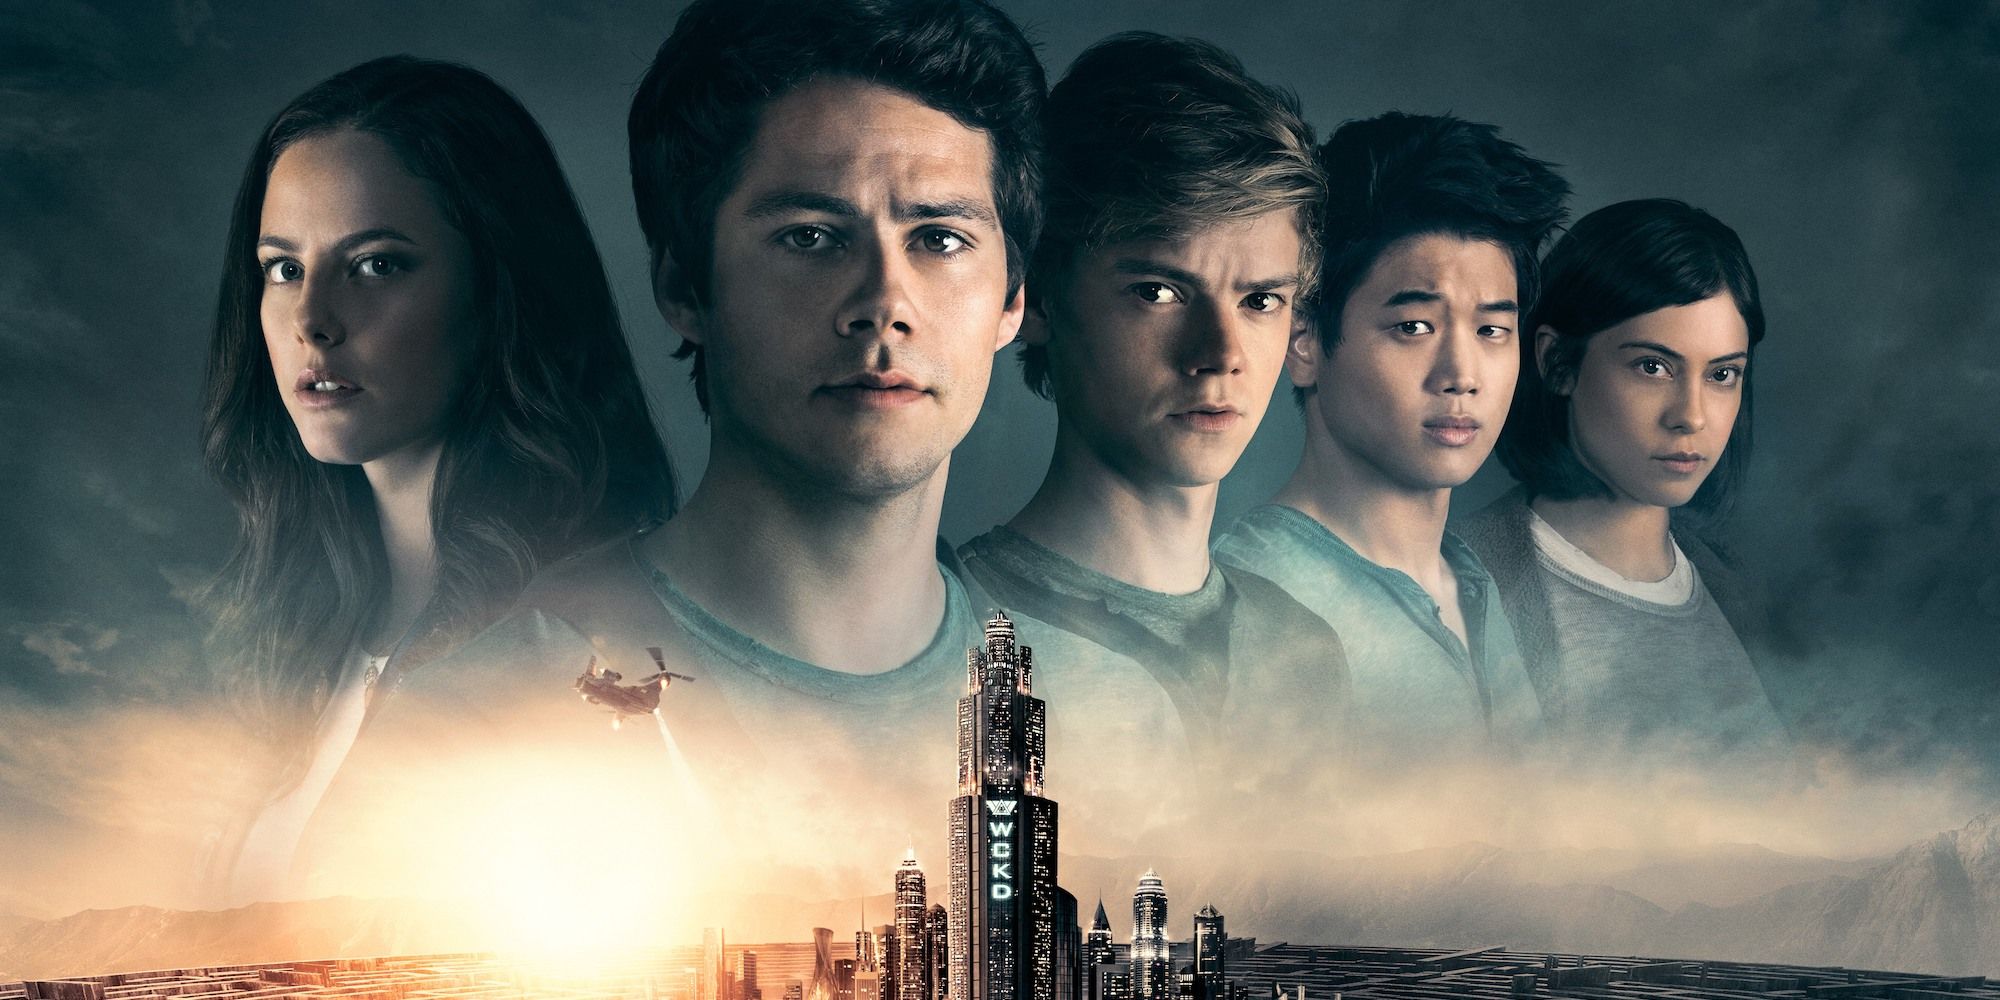 Maze Runner: The Death Cure Stars Reveal Exclusive Deleted Scene - IGN First